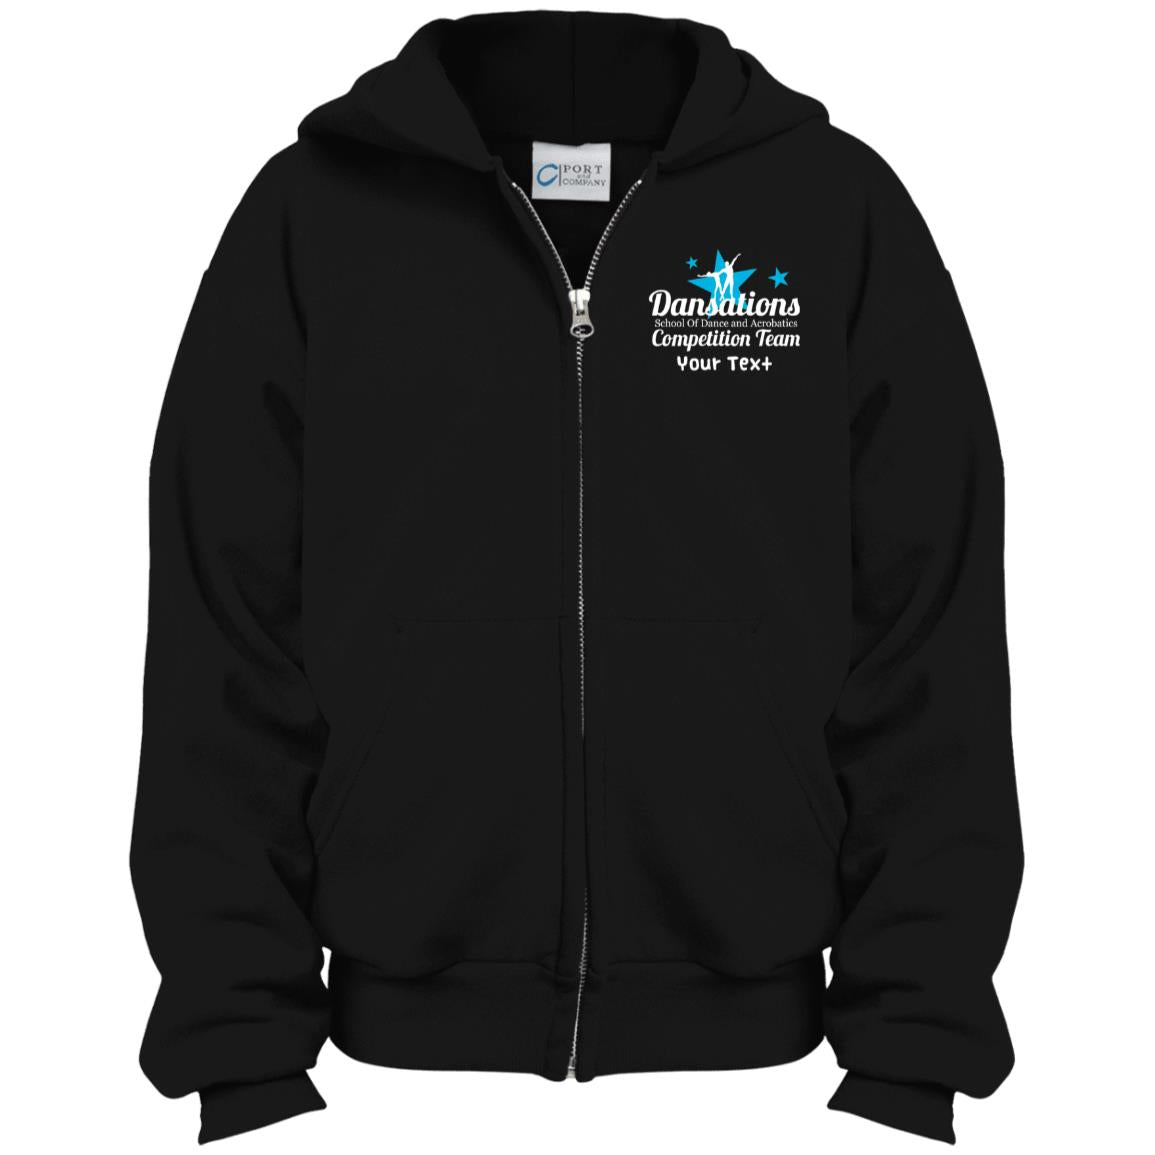 Dansations Competition Team Youth Full Zip Hoodie